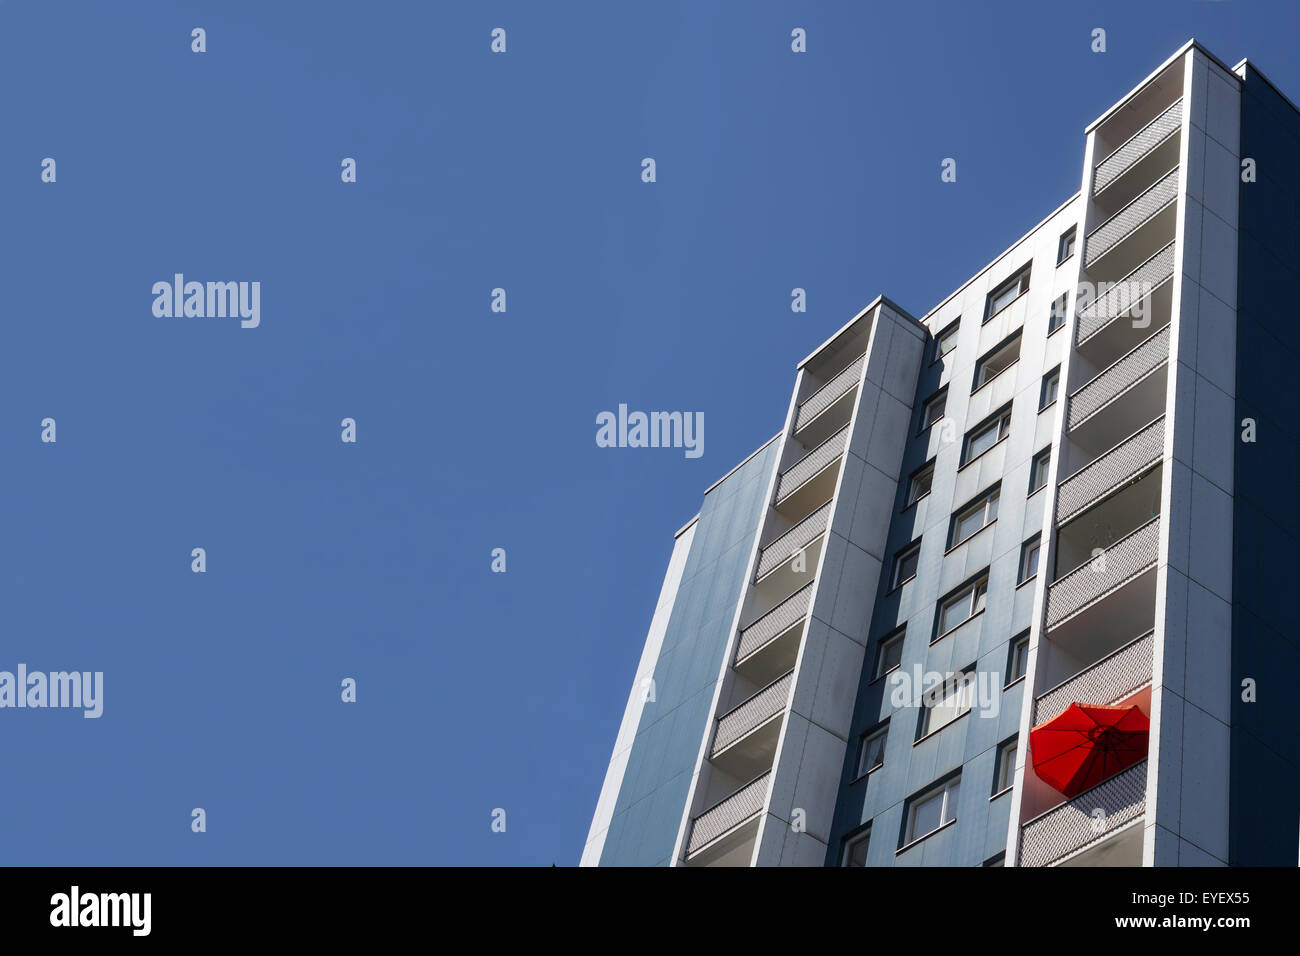 blue residential building berlin germany,blue sky and red umbrella on balcony Stock Photo